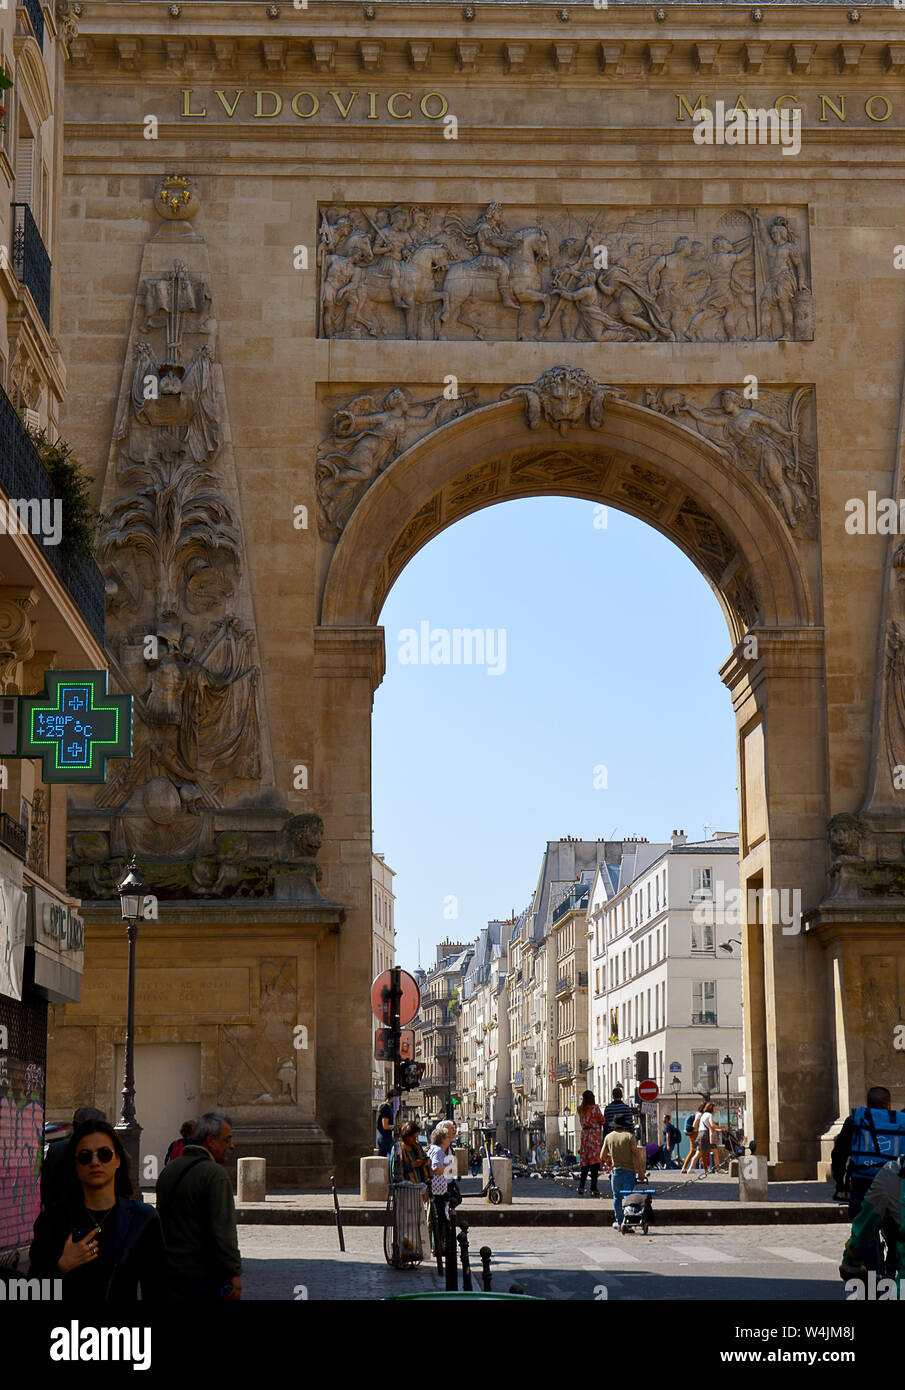 PARIS, FRANCE - 20 APRIL 2019: The  Porte Saint-Denis is a monument in the 10th arrondissement ordered by Louis XIV in 1672 to commemorate victories. Stock Photo